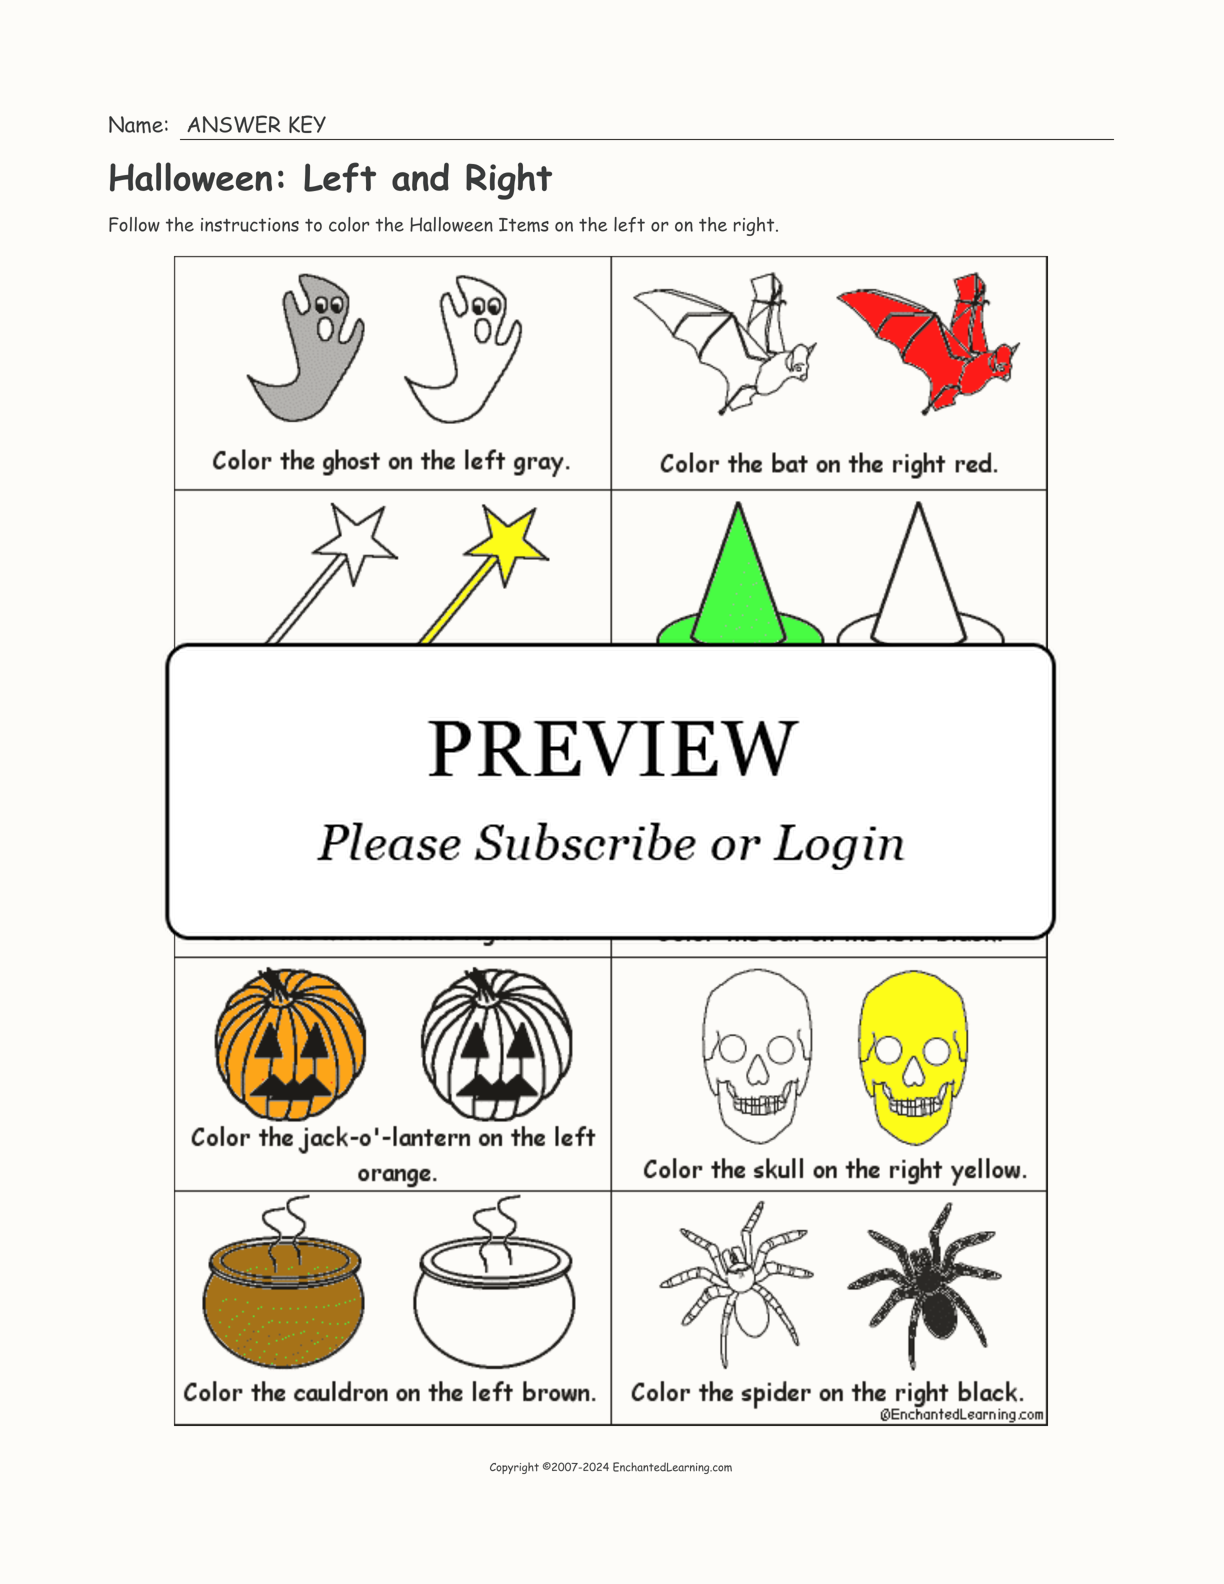 Halloween: Left and Right interactive worksheet page 2